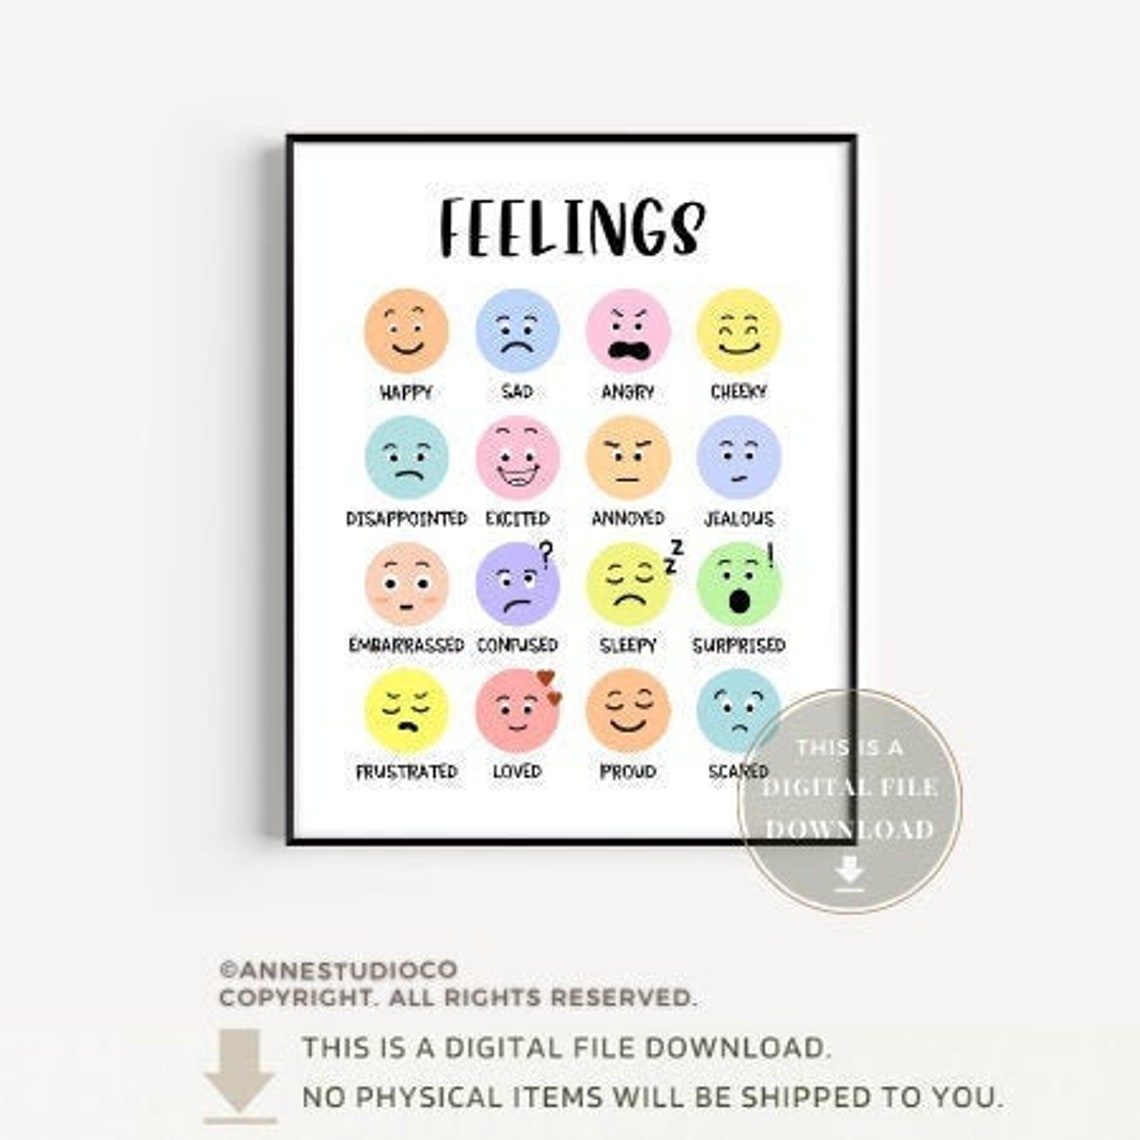 Feelings School Counseling Office Decor Counselor Posters | Etsy